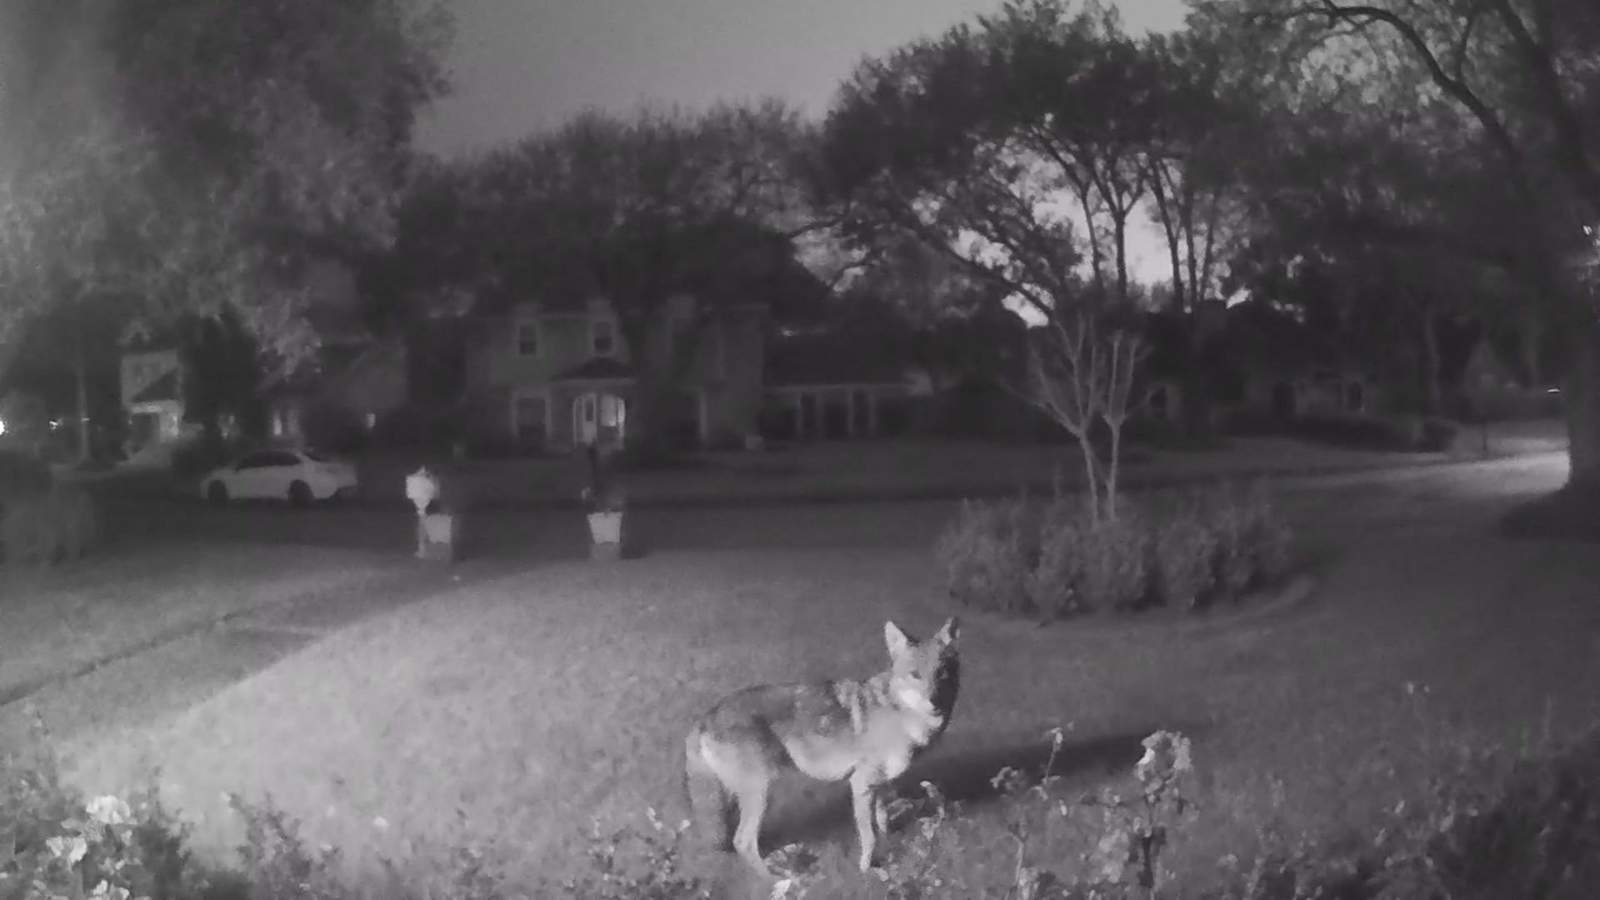 Coyotes alarming residents after devouring cat in Katy neighborhood